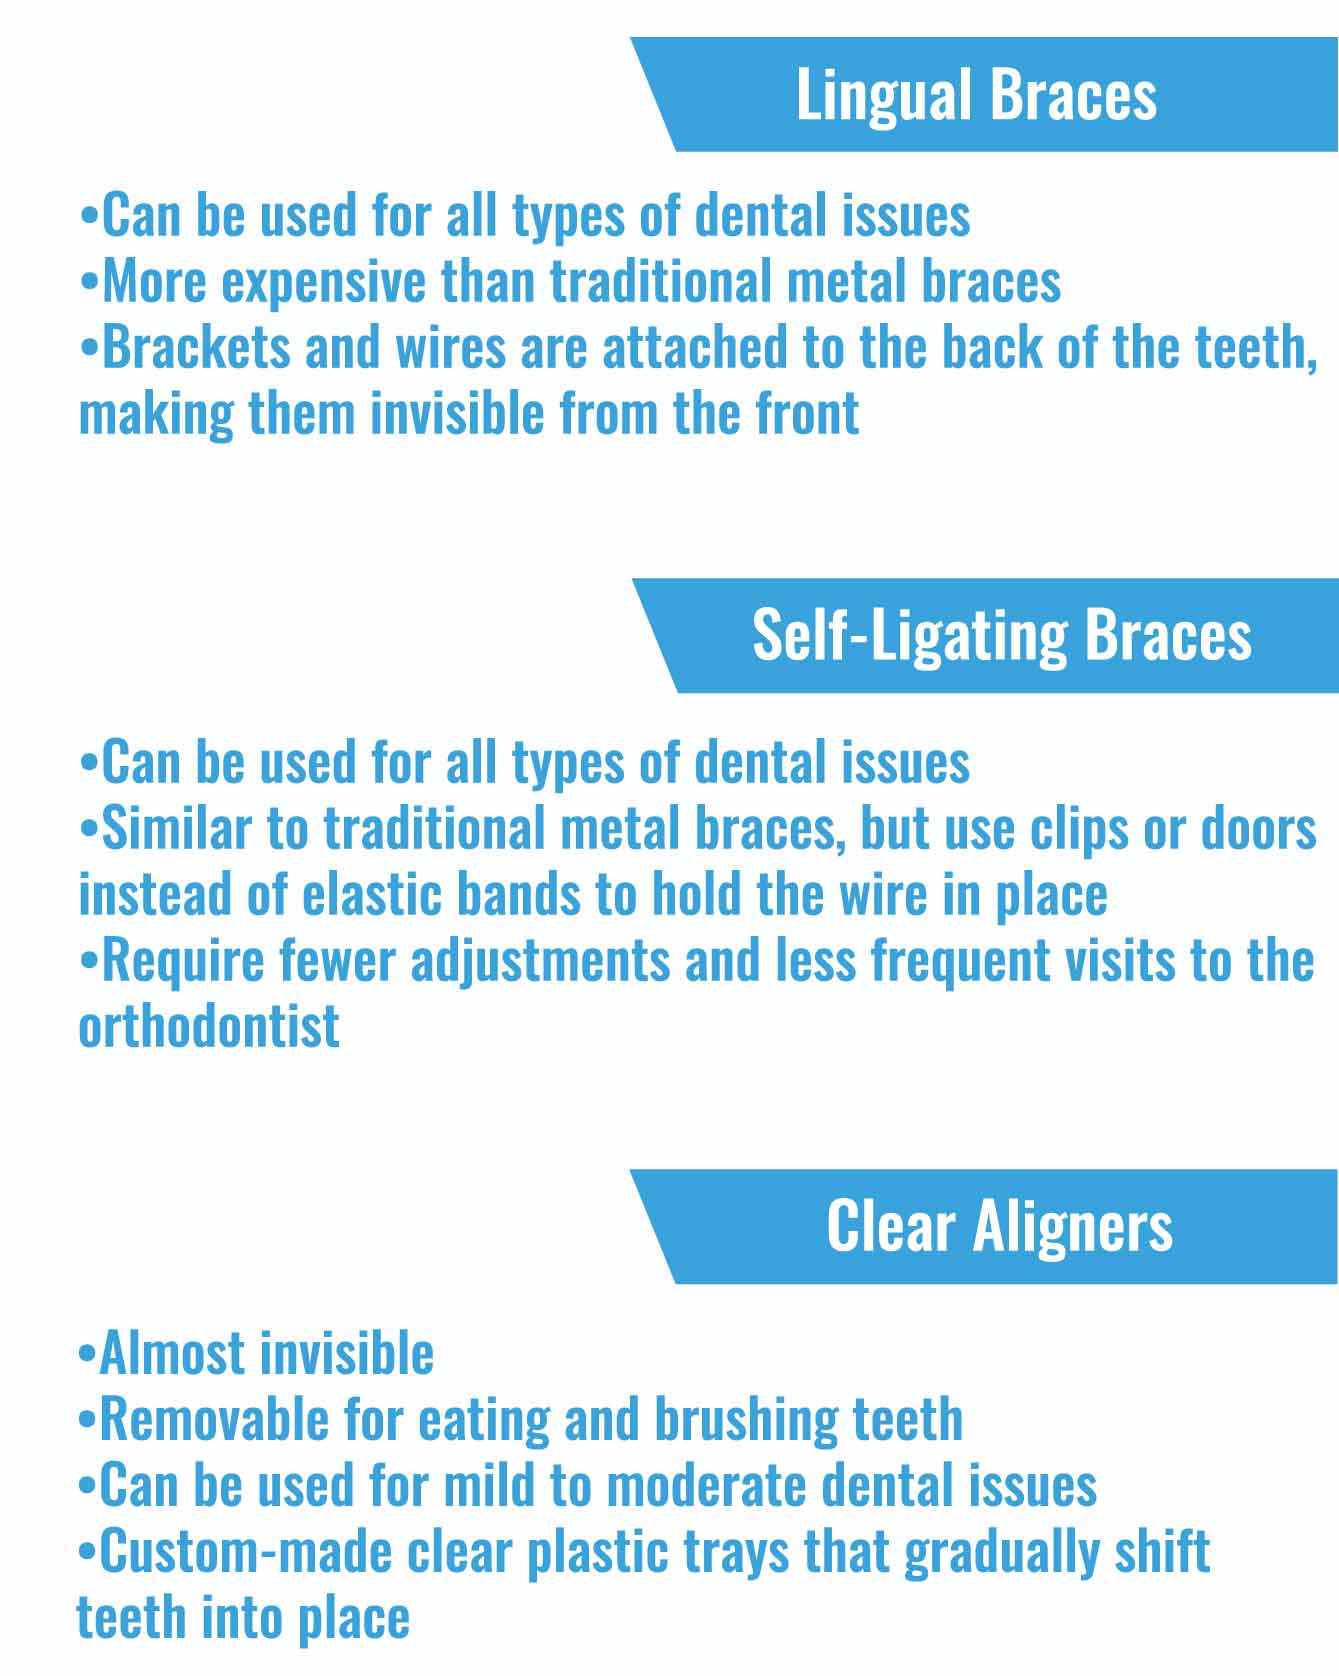 Types of Kids Braces and Teenagers Braces